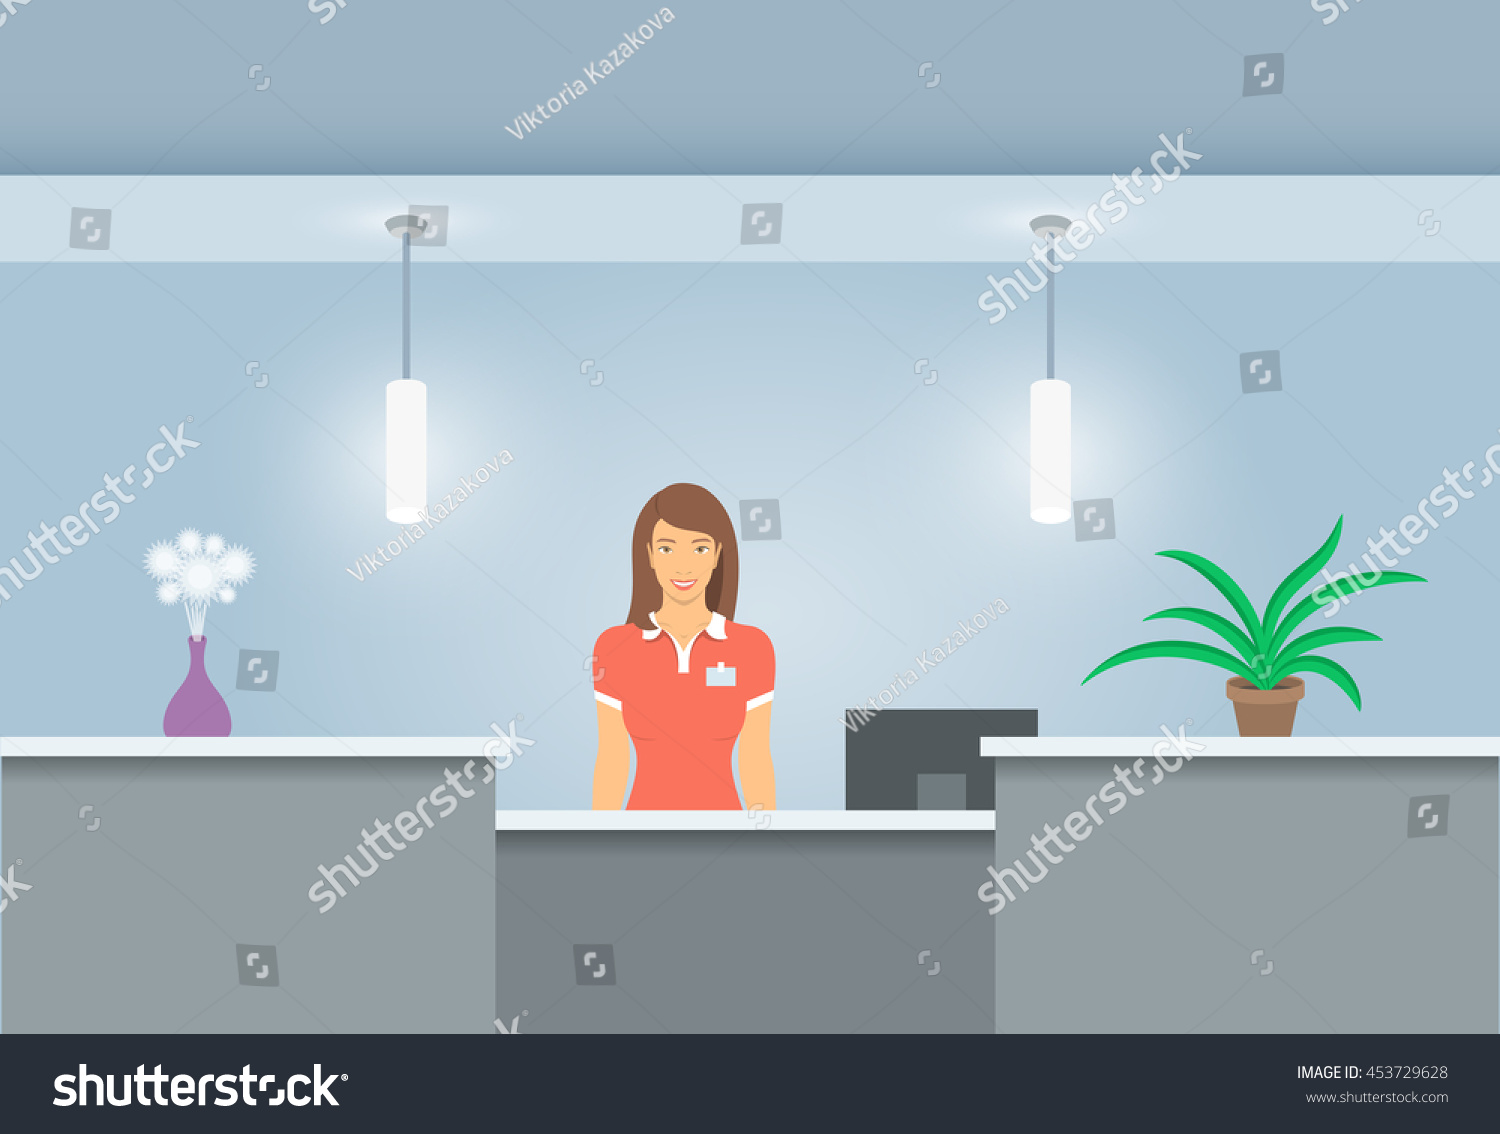 Young Woman Receptionist Stands Reception Desk Stock Vector Royalty Free 453729628 Shutterstock 8213